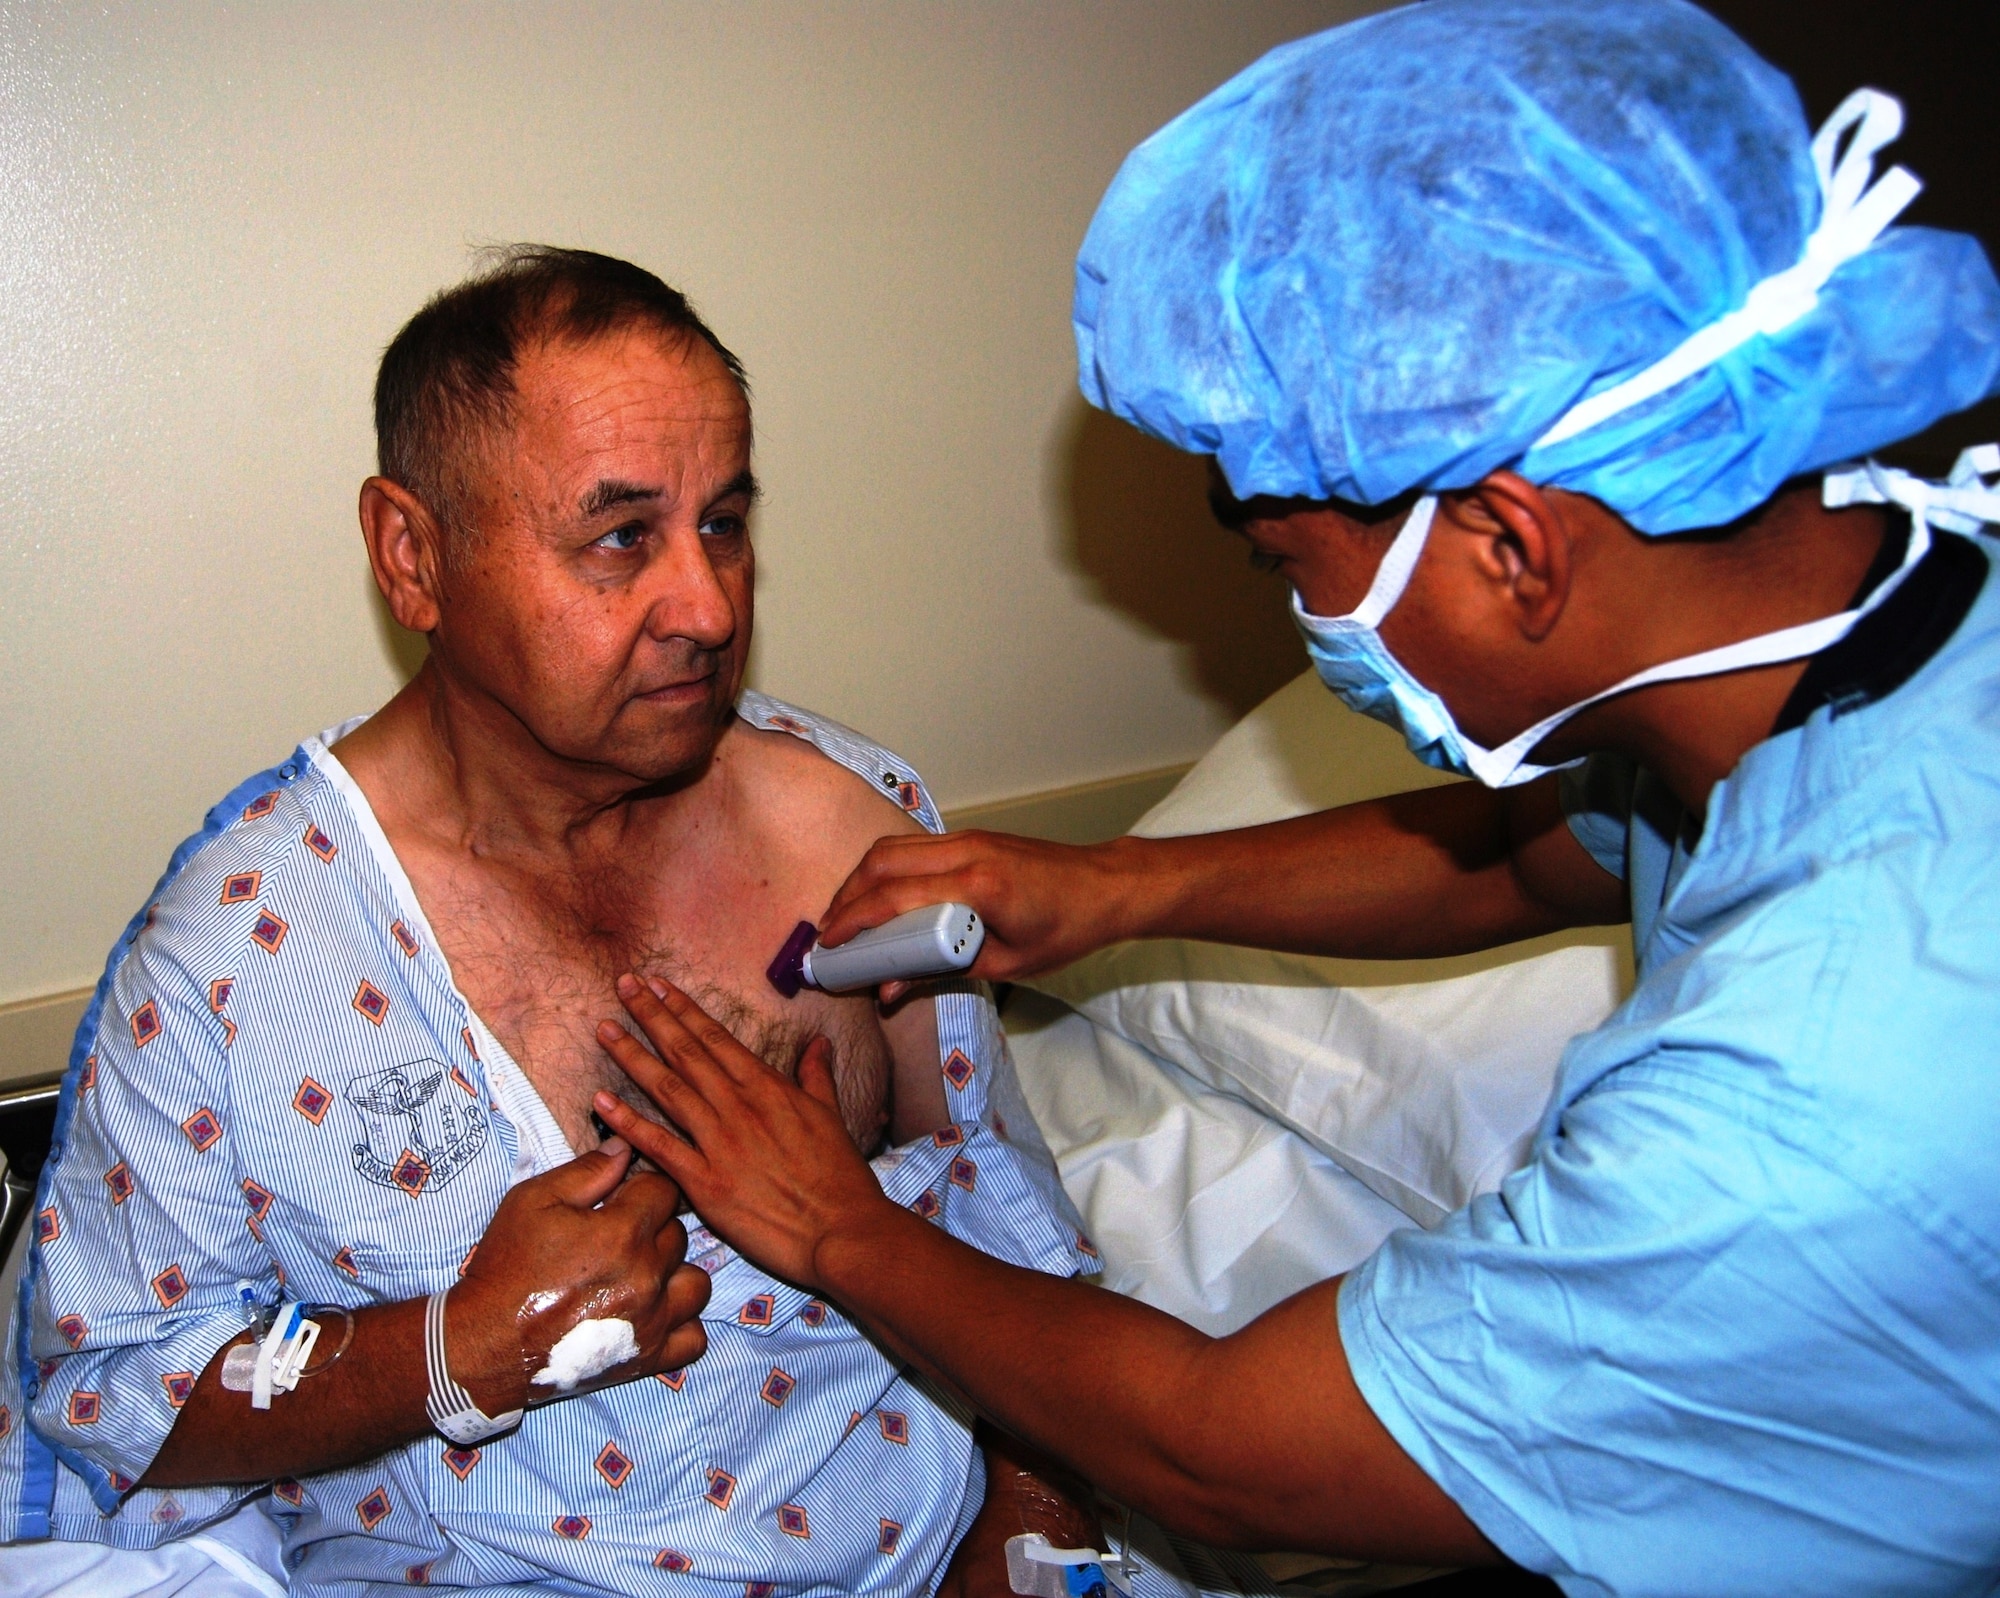 Senior Airman Maynard Galvez, Cardiopulmonary Laboratory technologist, prepares the implantation site of the Current RF Wireless Implantable Cardioverter Defibrillator in Richard Pink’s chest. David Grant USAF Medical Center is the first hospital in the western region to perform the implant. (U.S. Air Force photo/Master Sgt. Austin Delacruz Jr.)